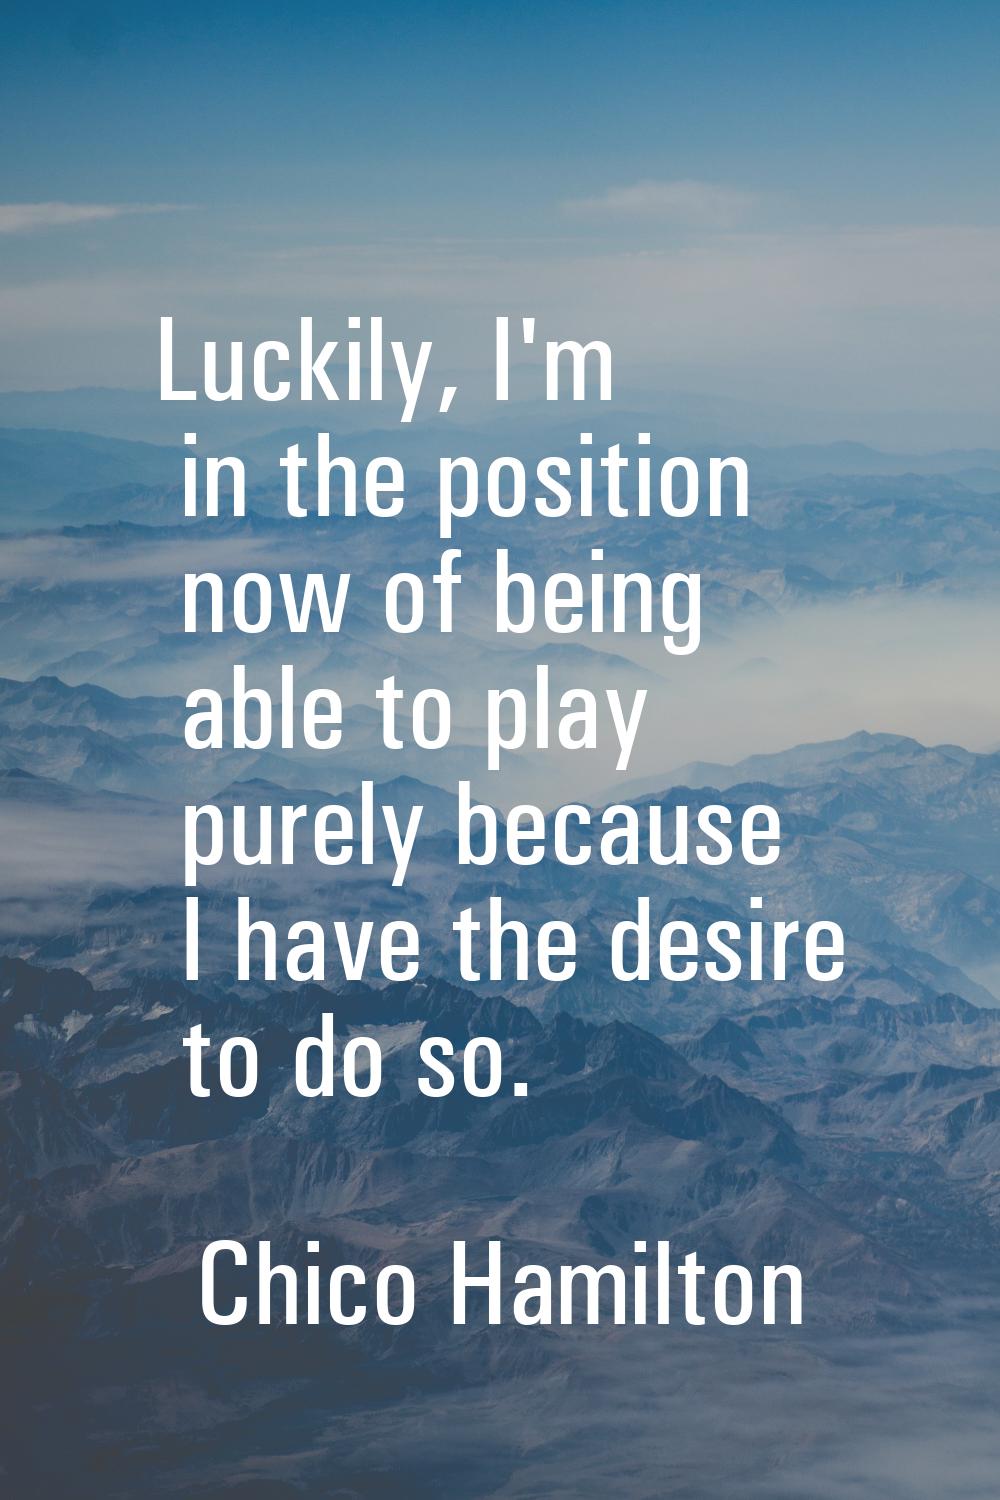 Luckily, I'm in the position now of being able to play purely because I have the desire to do so.